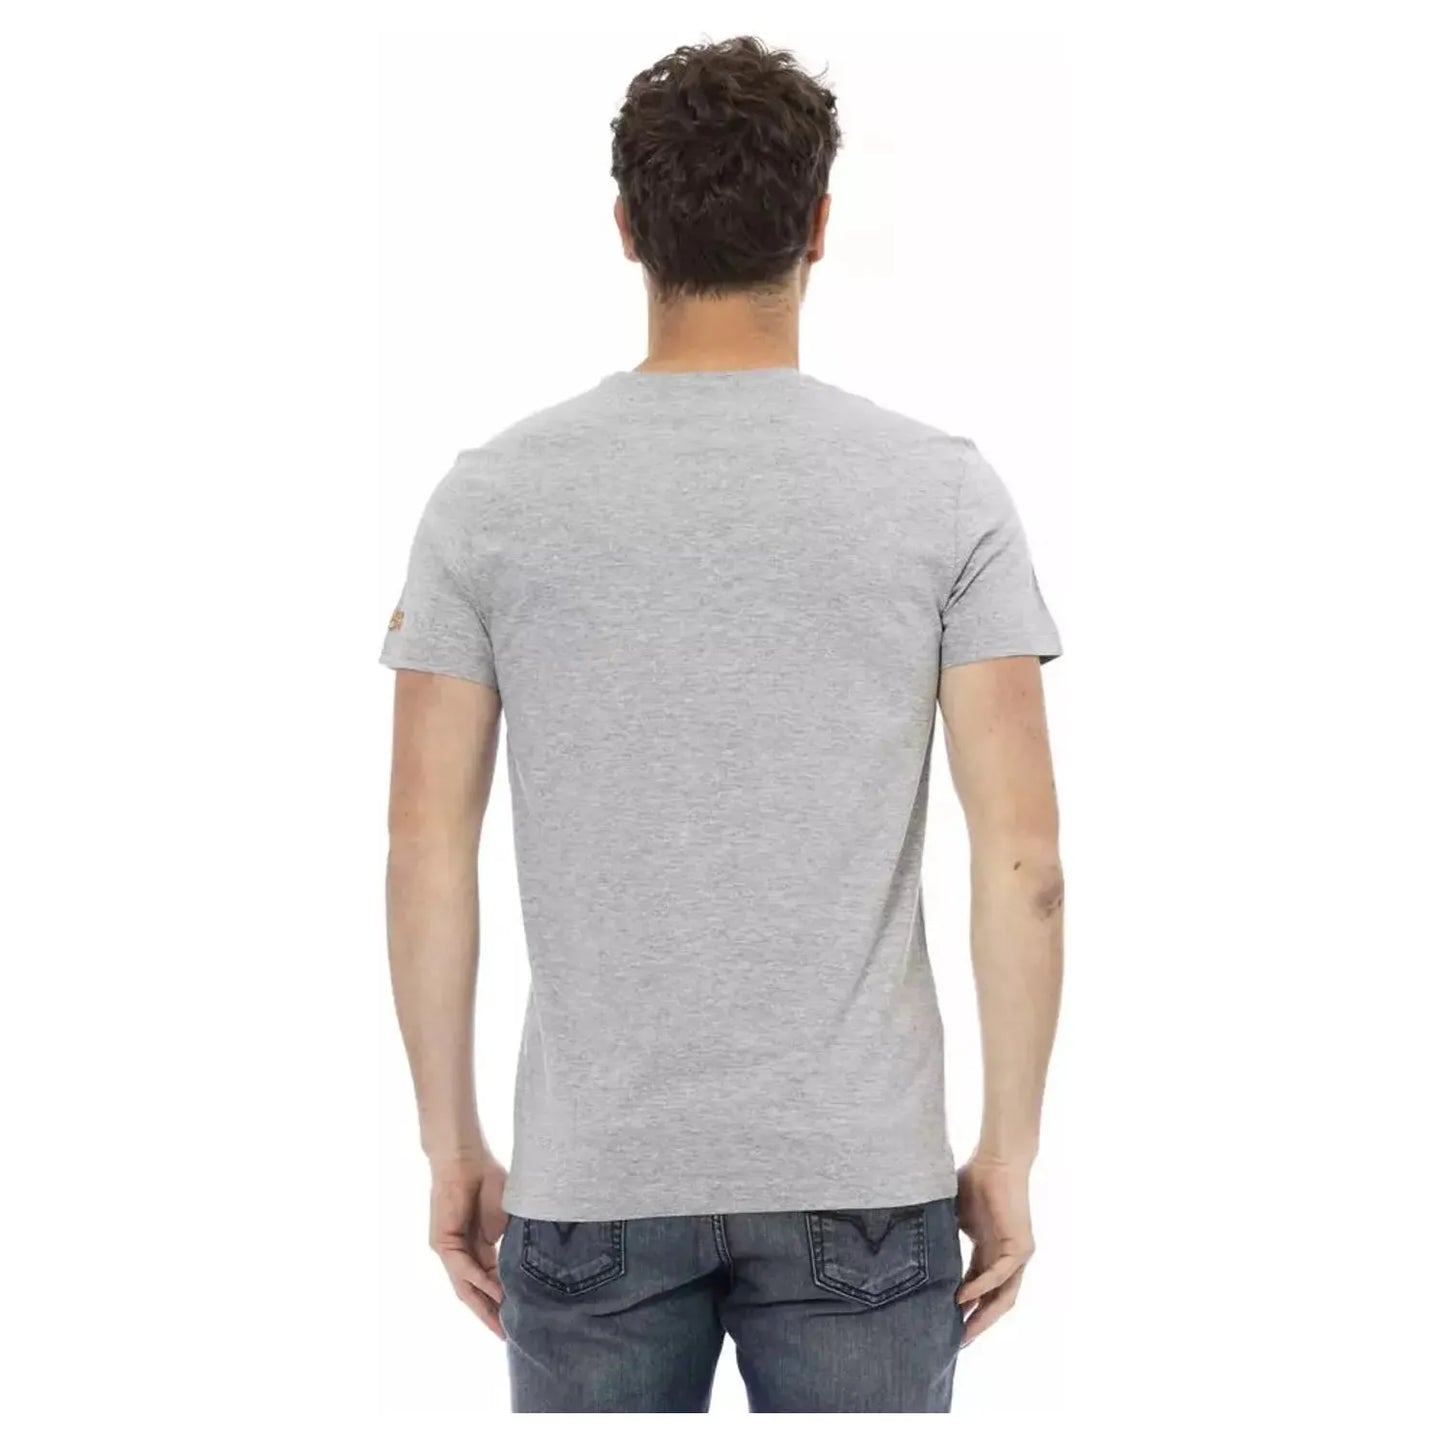 Trussardi Action Chic Gray Cotton-Blend Tee with Artistic Front Print gray-cotton-t-shirt-92